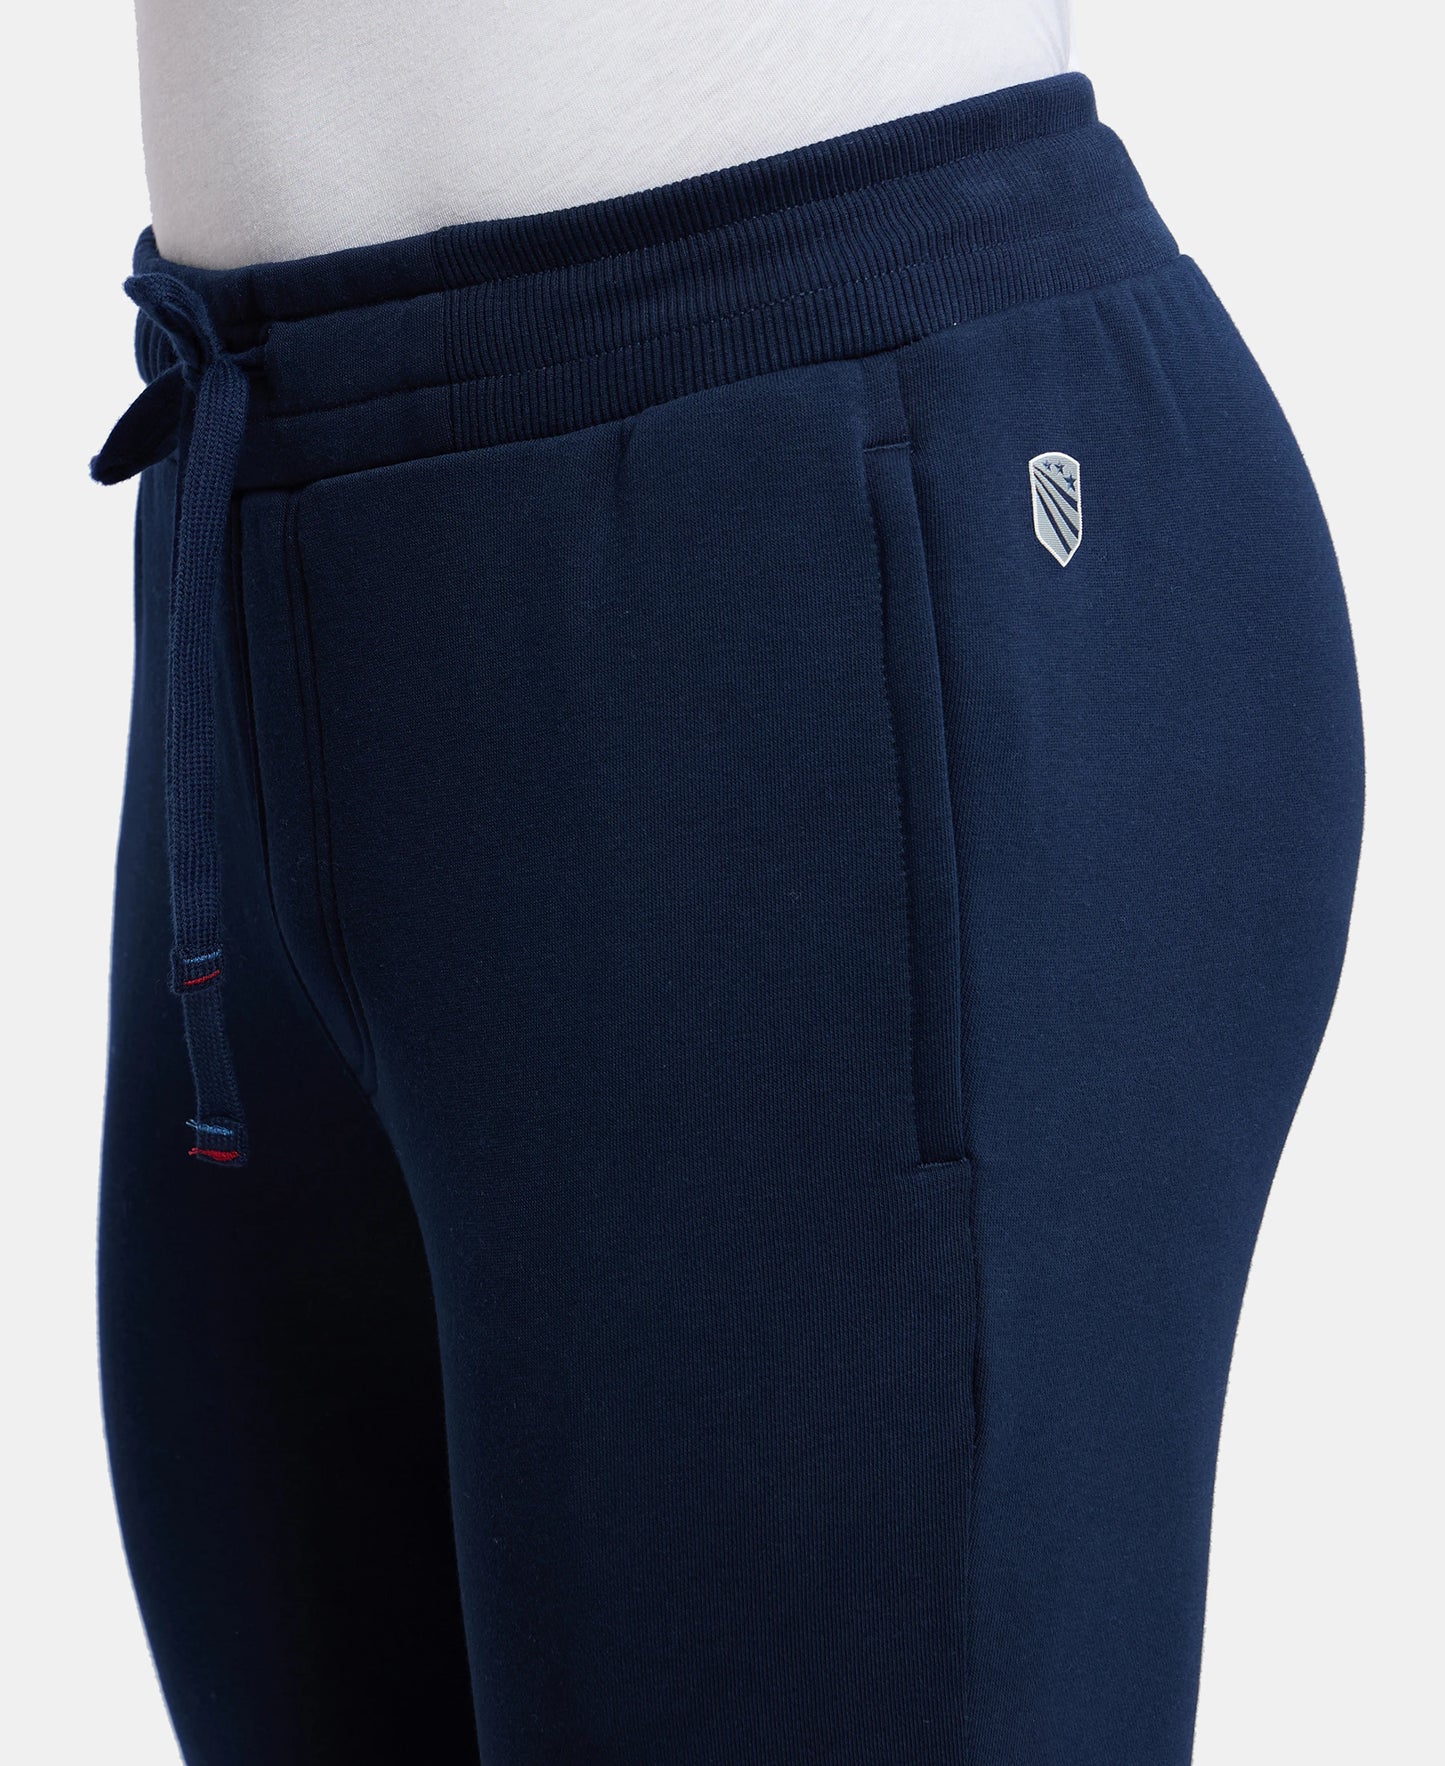 Super Combed Cotton Rich Fleece Trackpants with StayWarm Technology - Navy-7